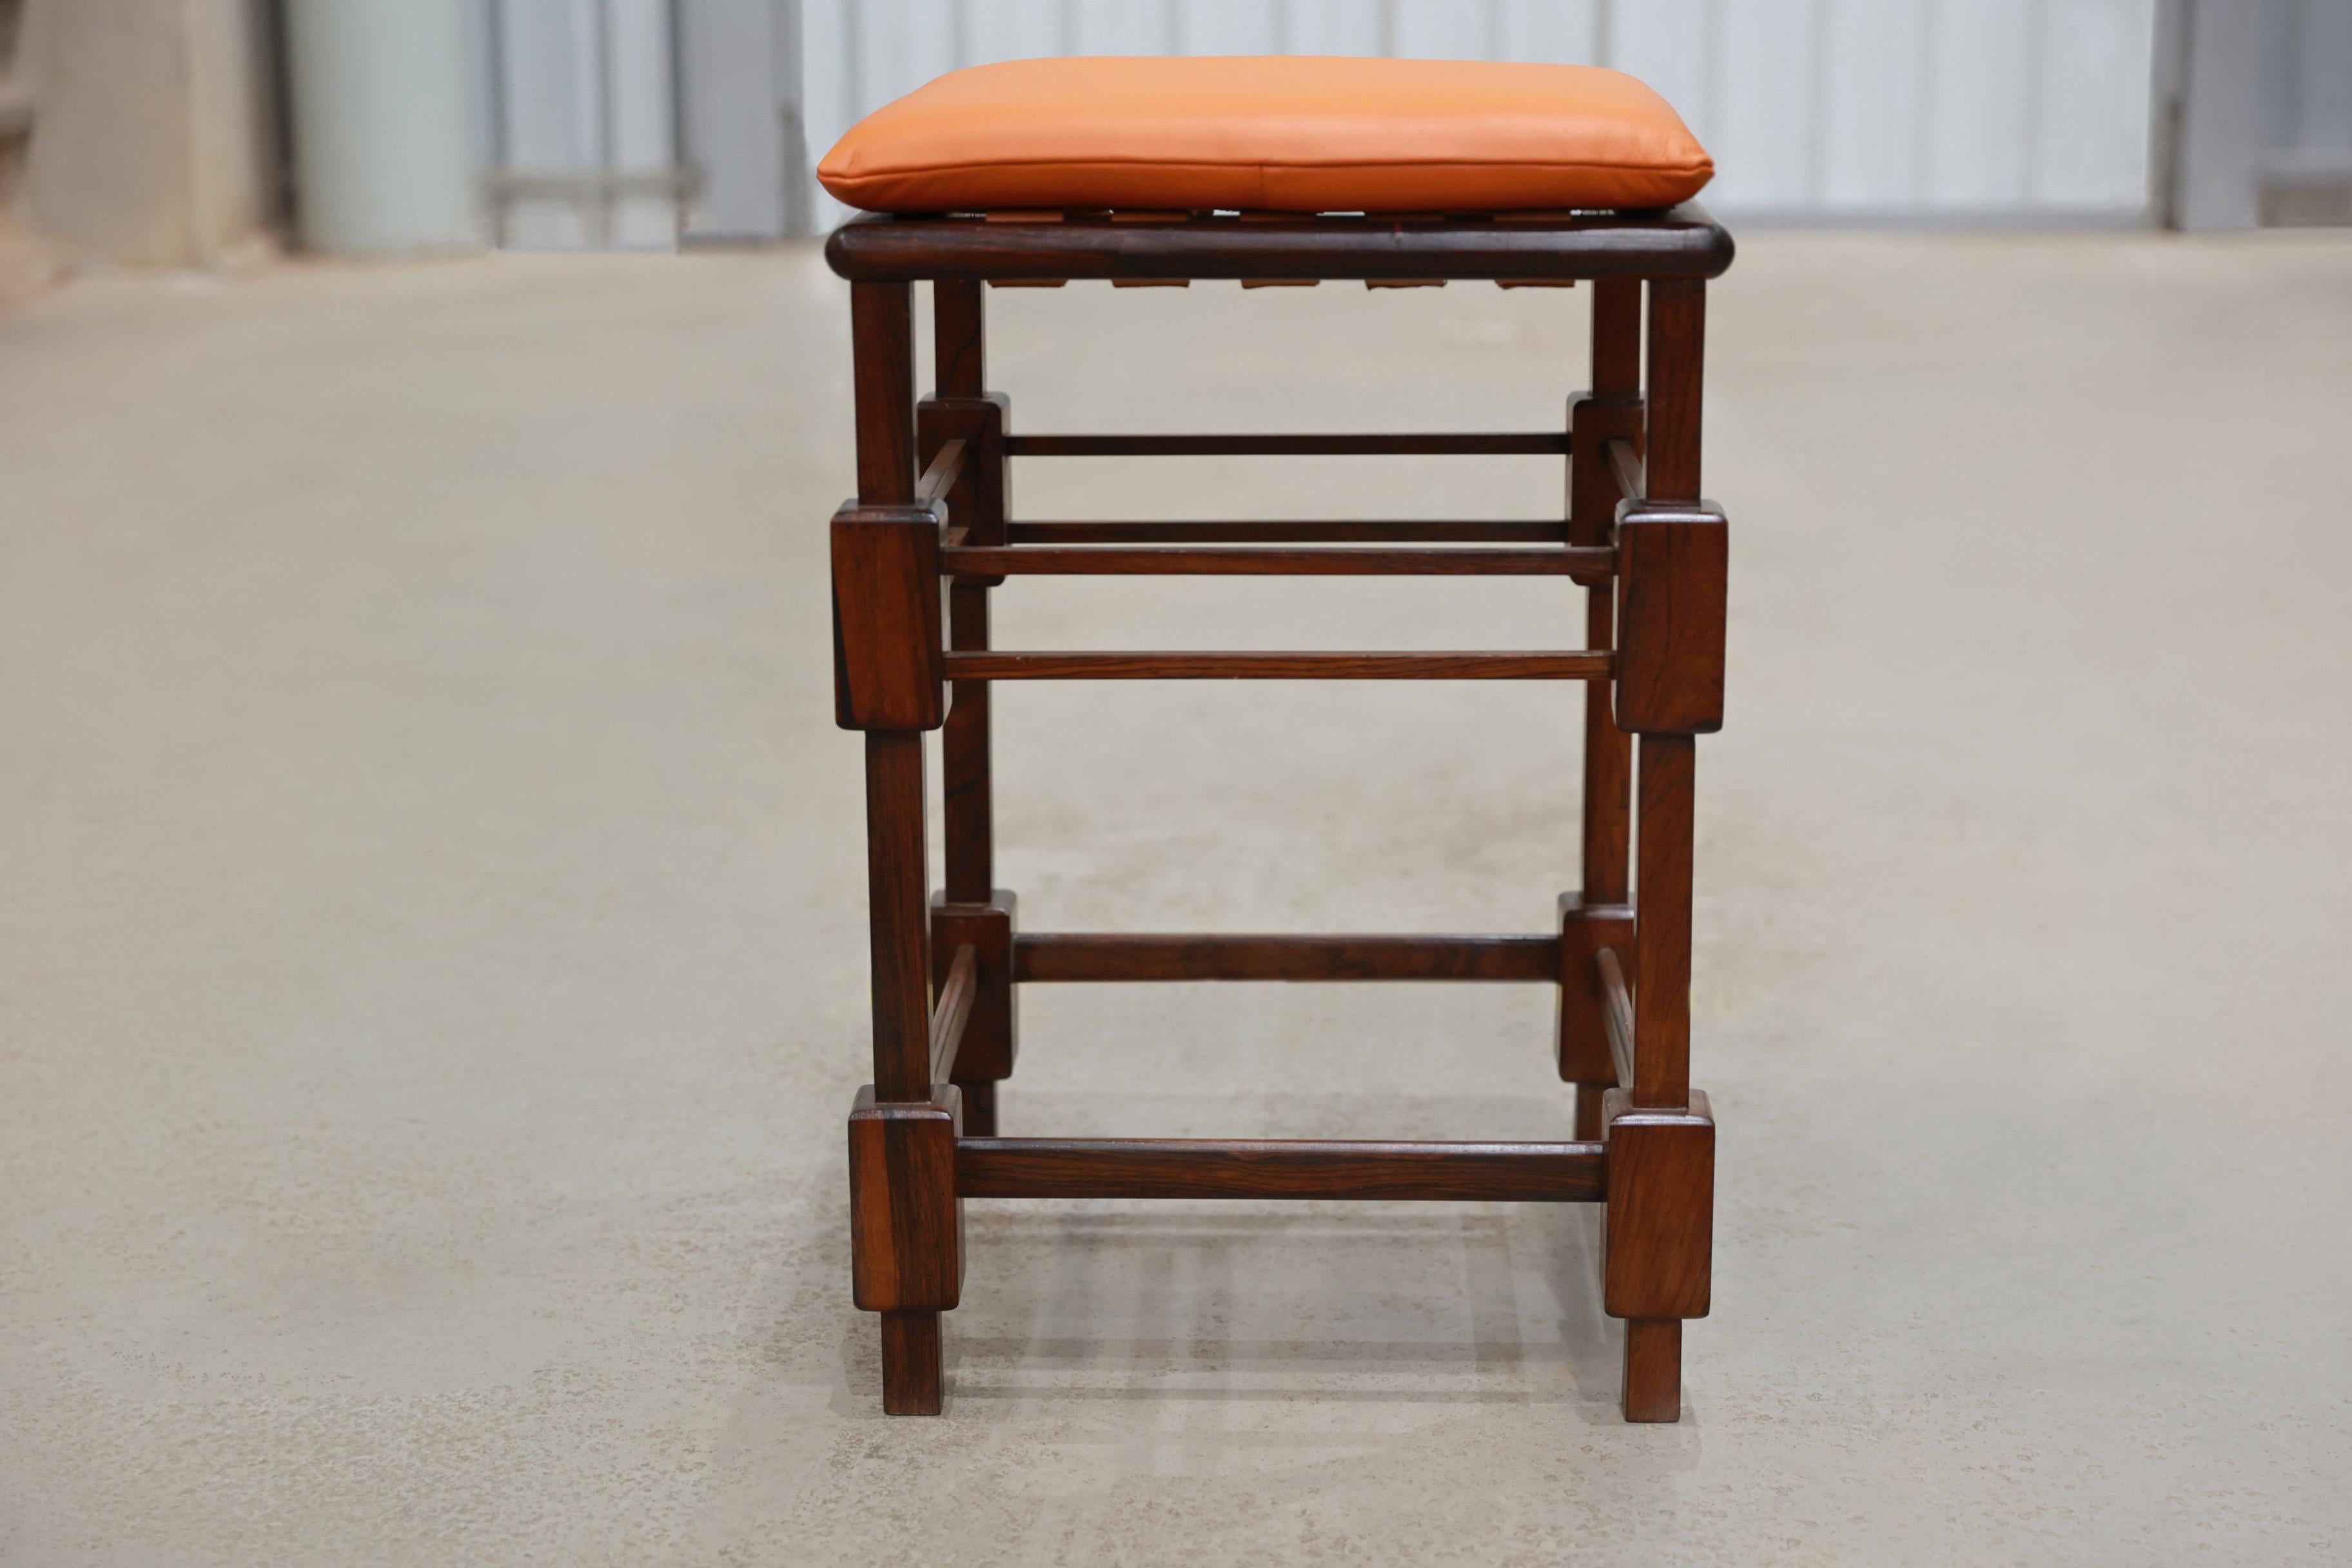 Brazilian Tall “Magrini” Stool in Hardwood and Leather by Sergio Rodrigues, c. 1960s